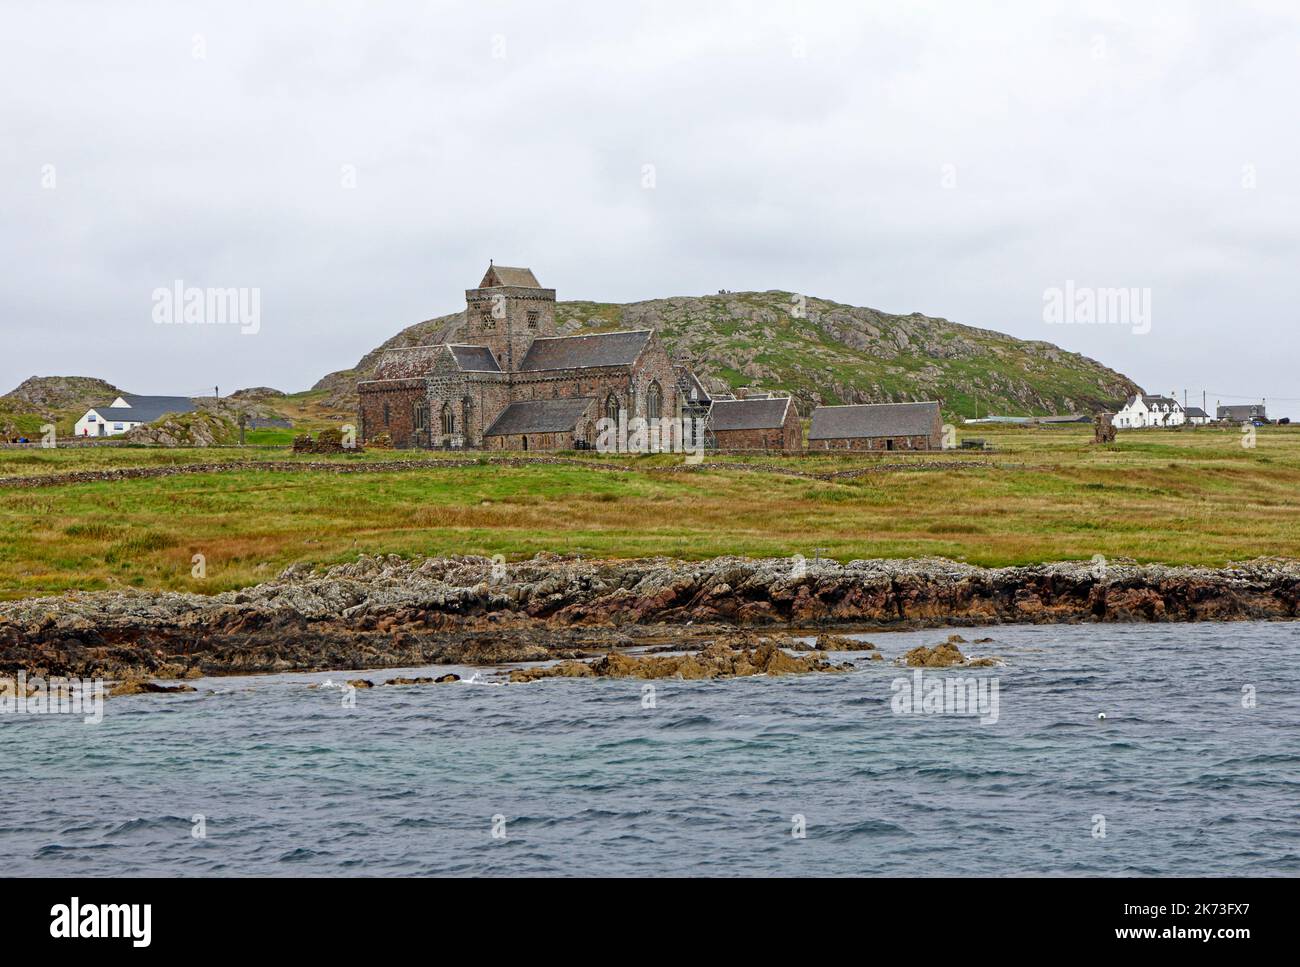 A view of the Abbey on the Isle of Iona taken from a passing boat in the Sound of Iona in the Inner Hebrides, Argyll and Bute, Scotland. Stock Photo